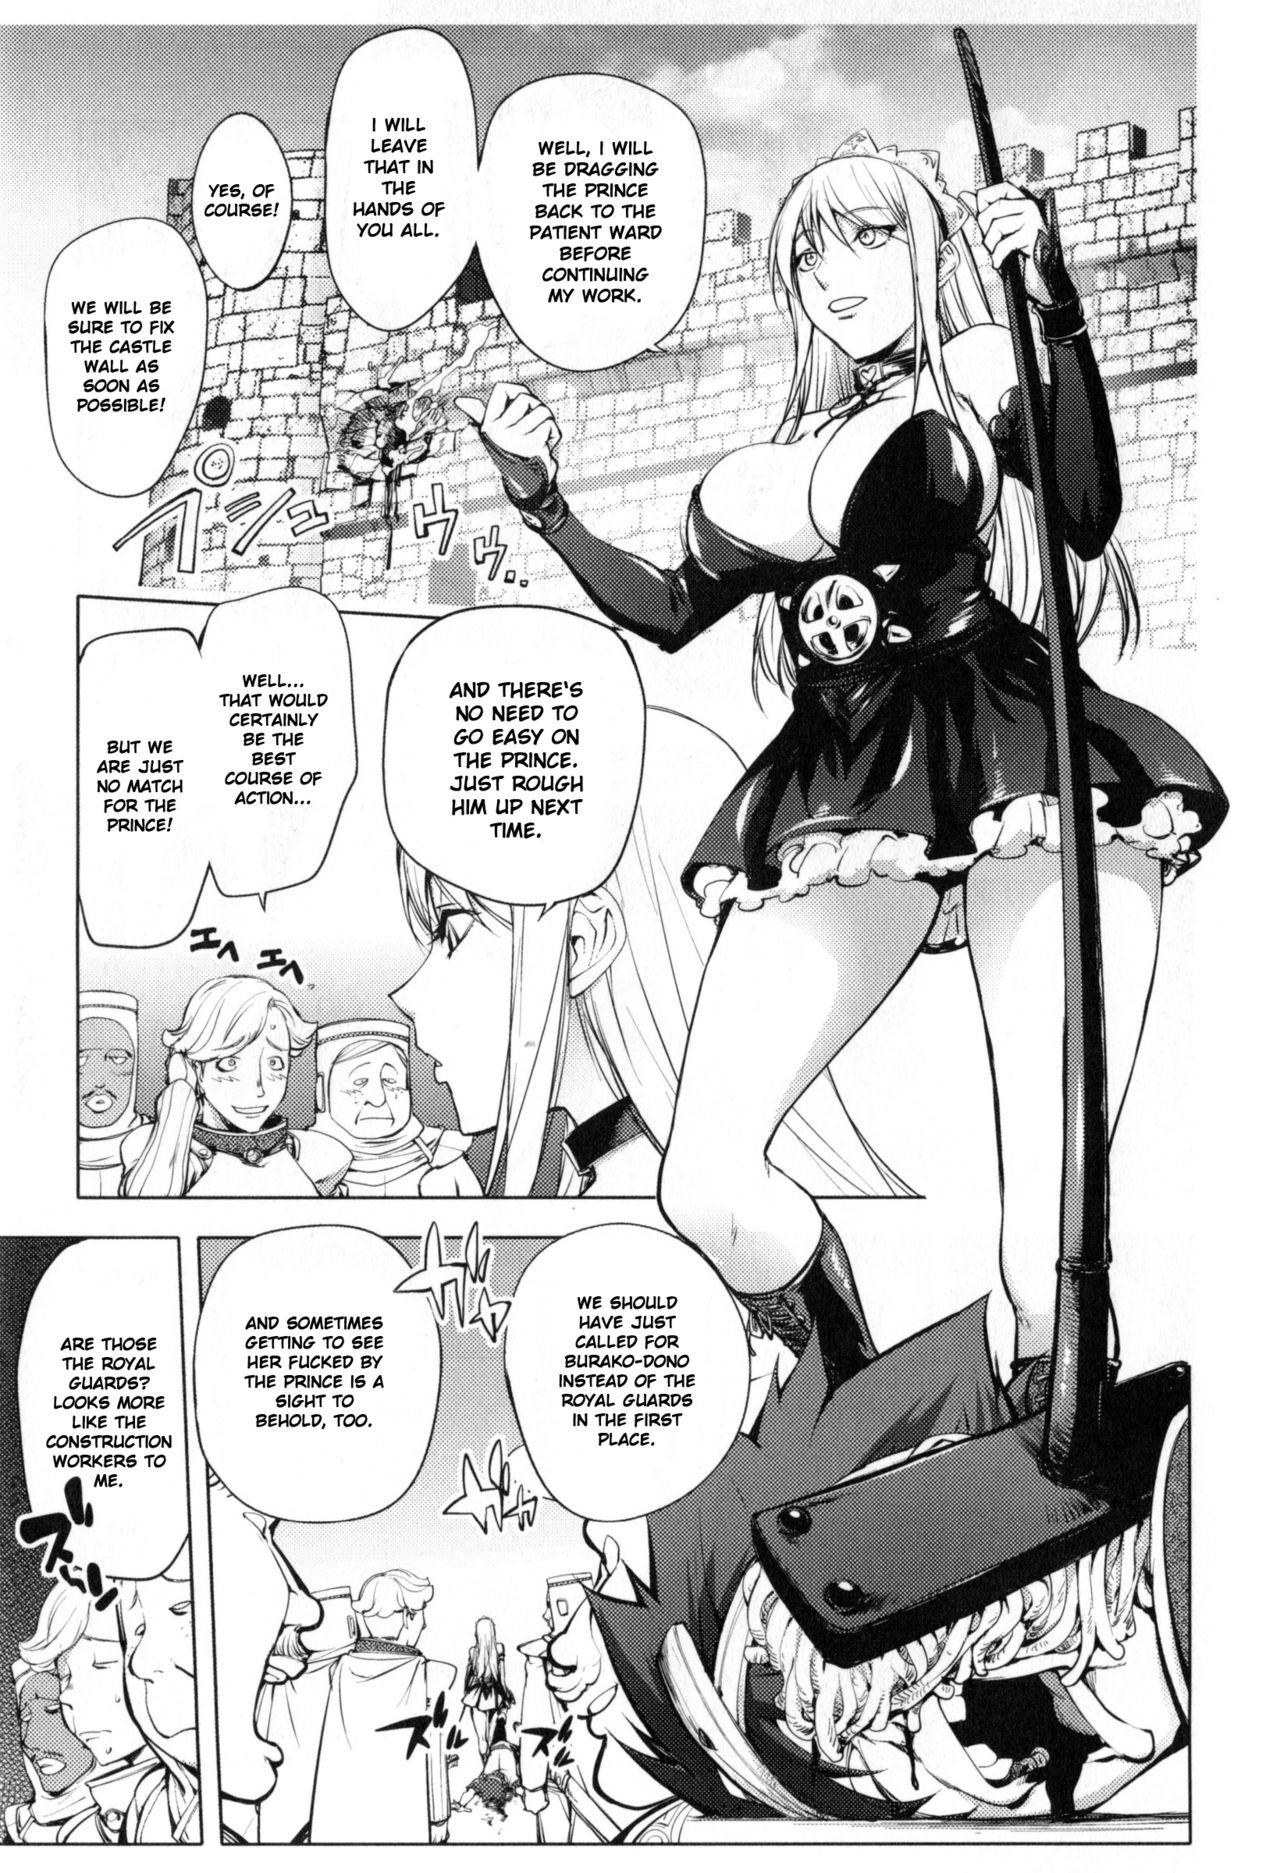 Snake Girls 2 | The Adventures Of The Three Heroes: Chapter 6 - Snake Girl Part 2 3